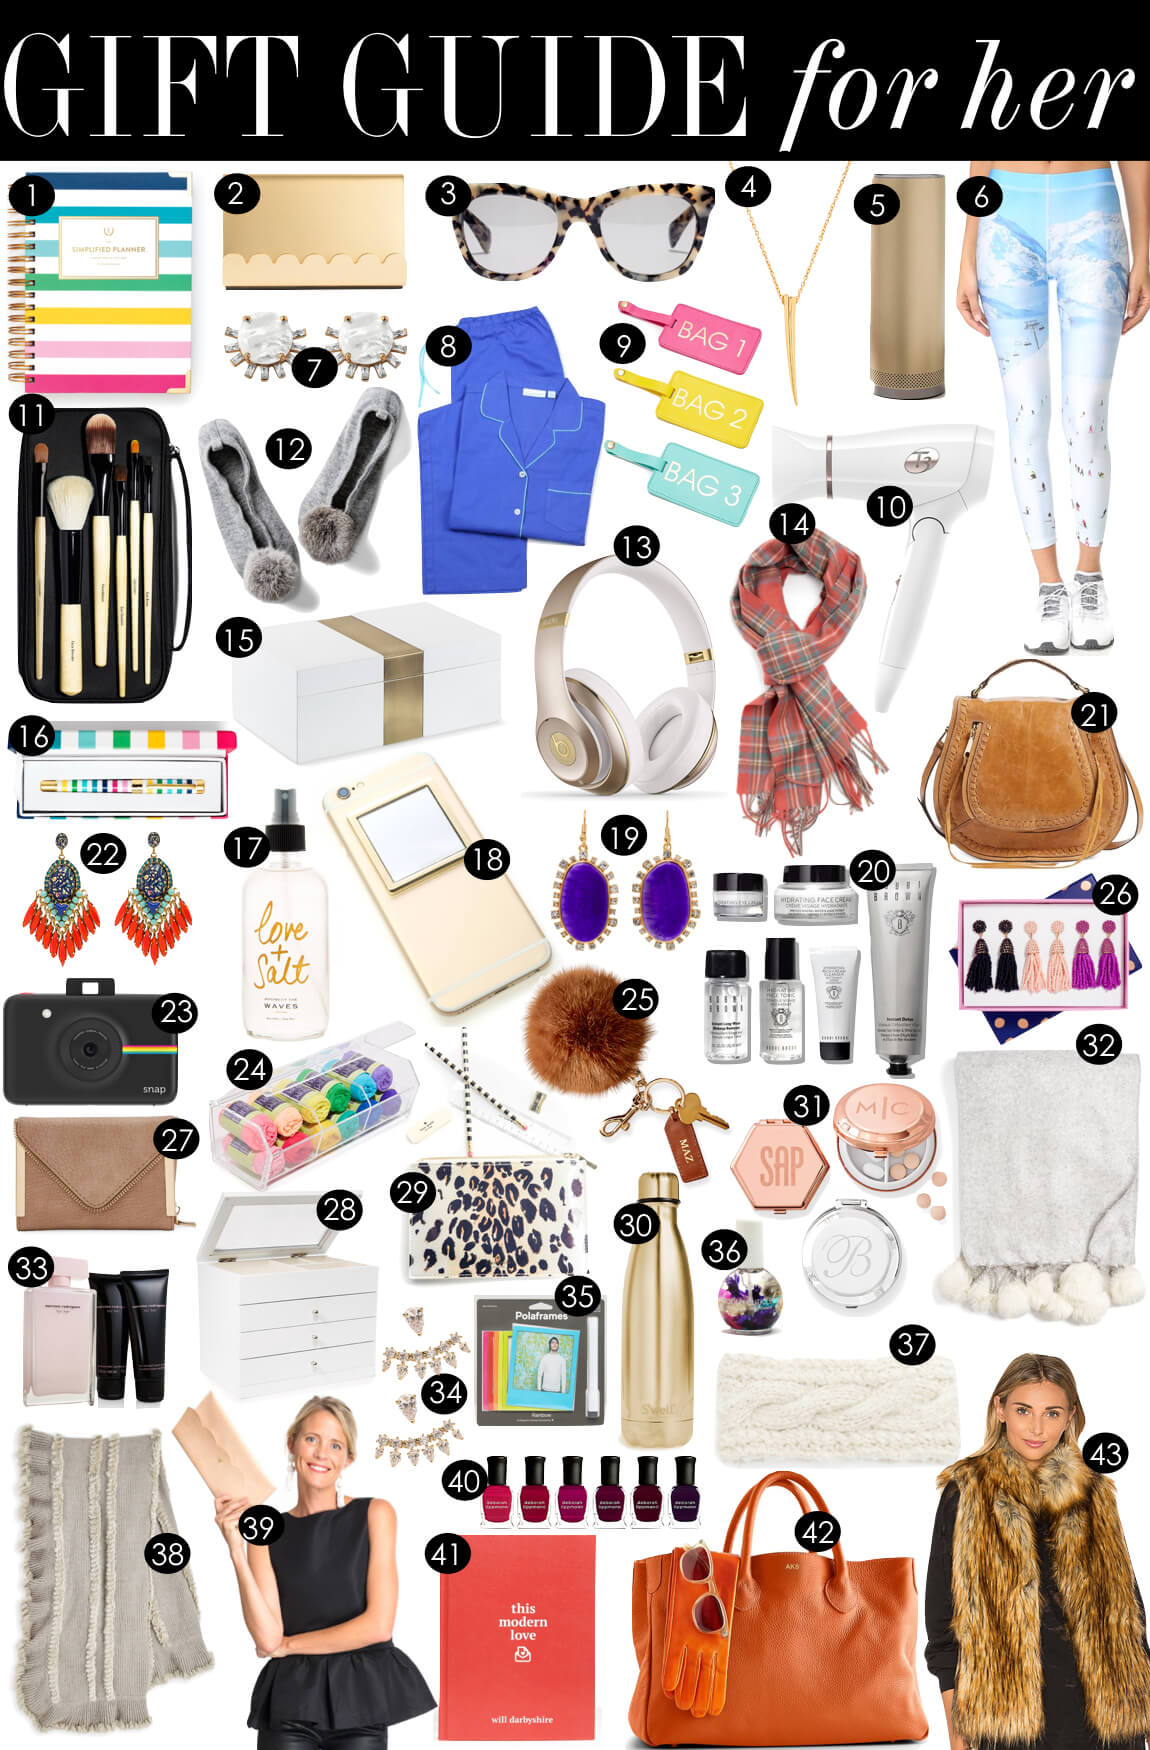 Gift Guide for Her  |  Kiki's List